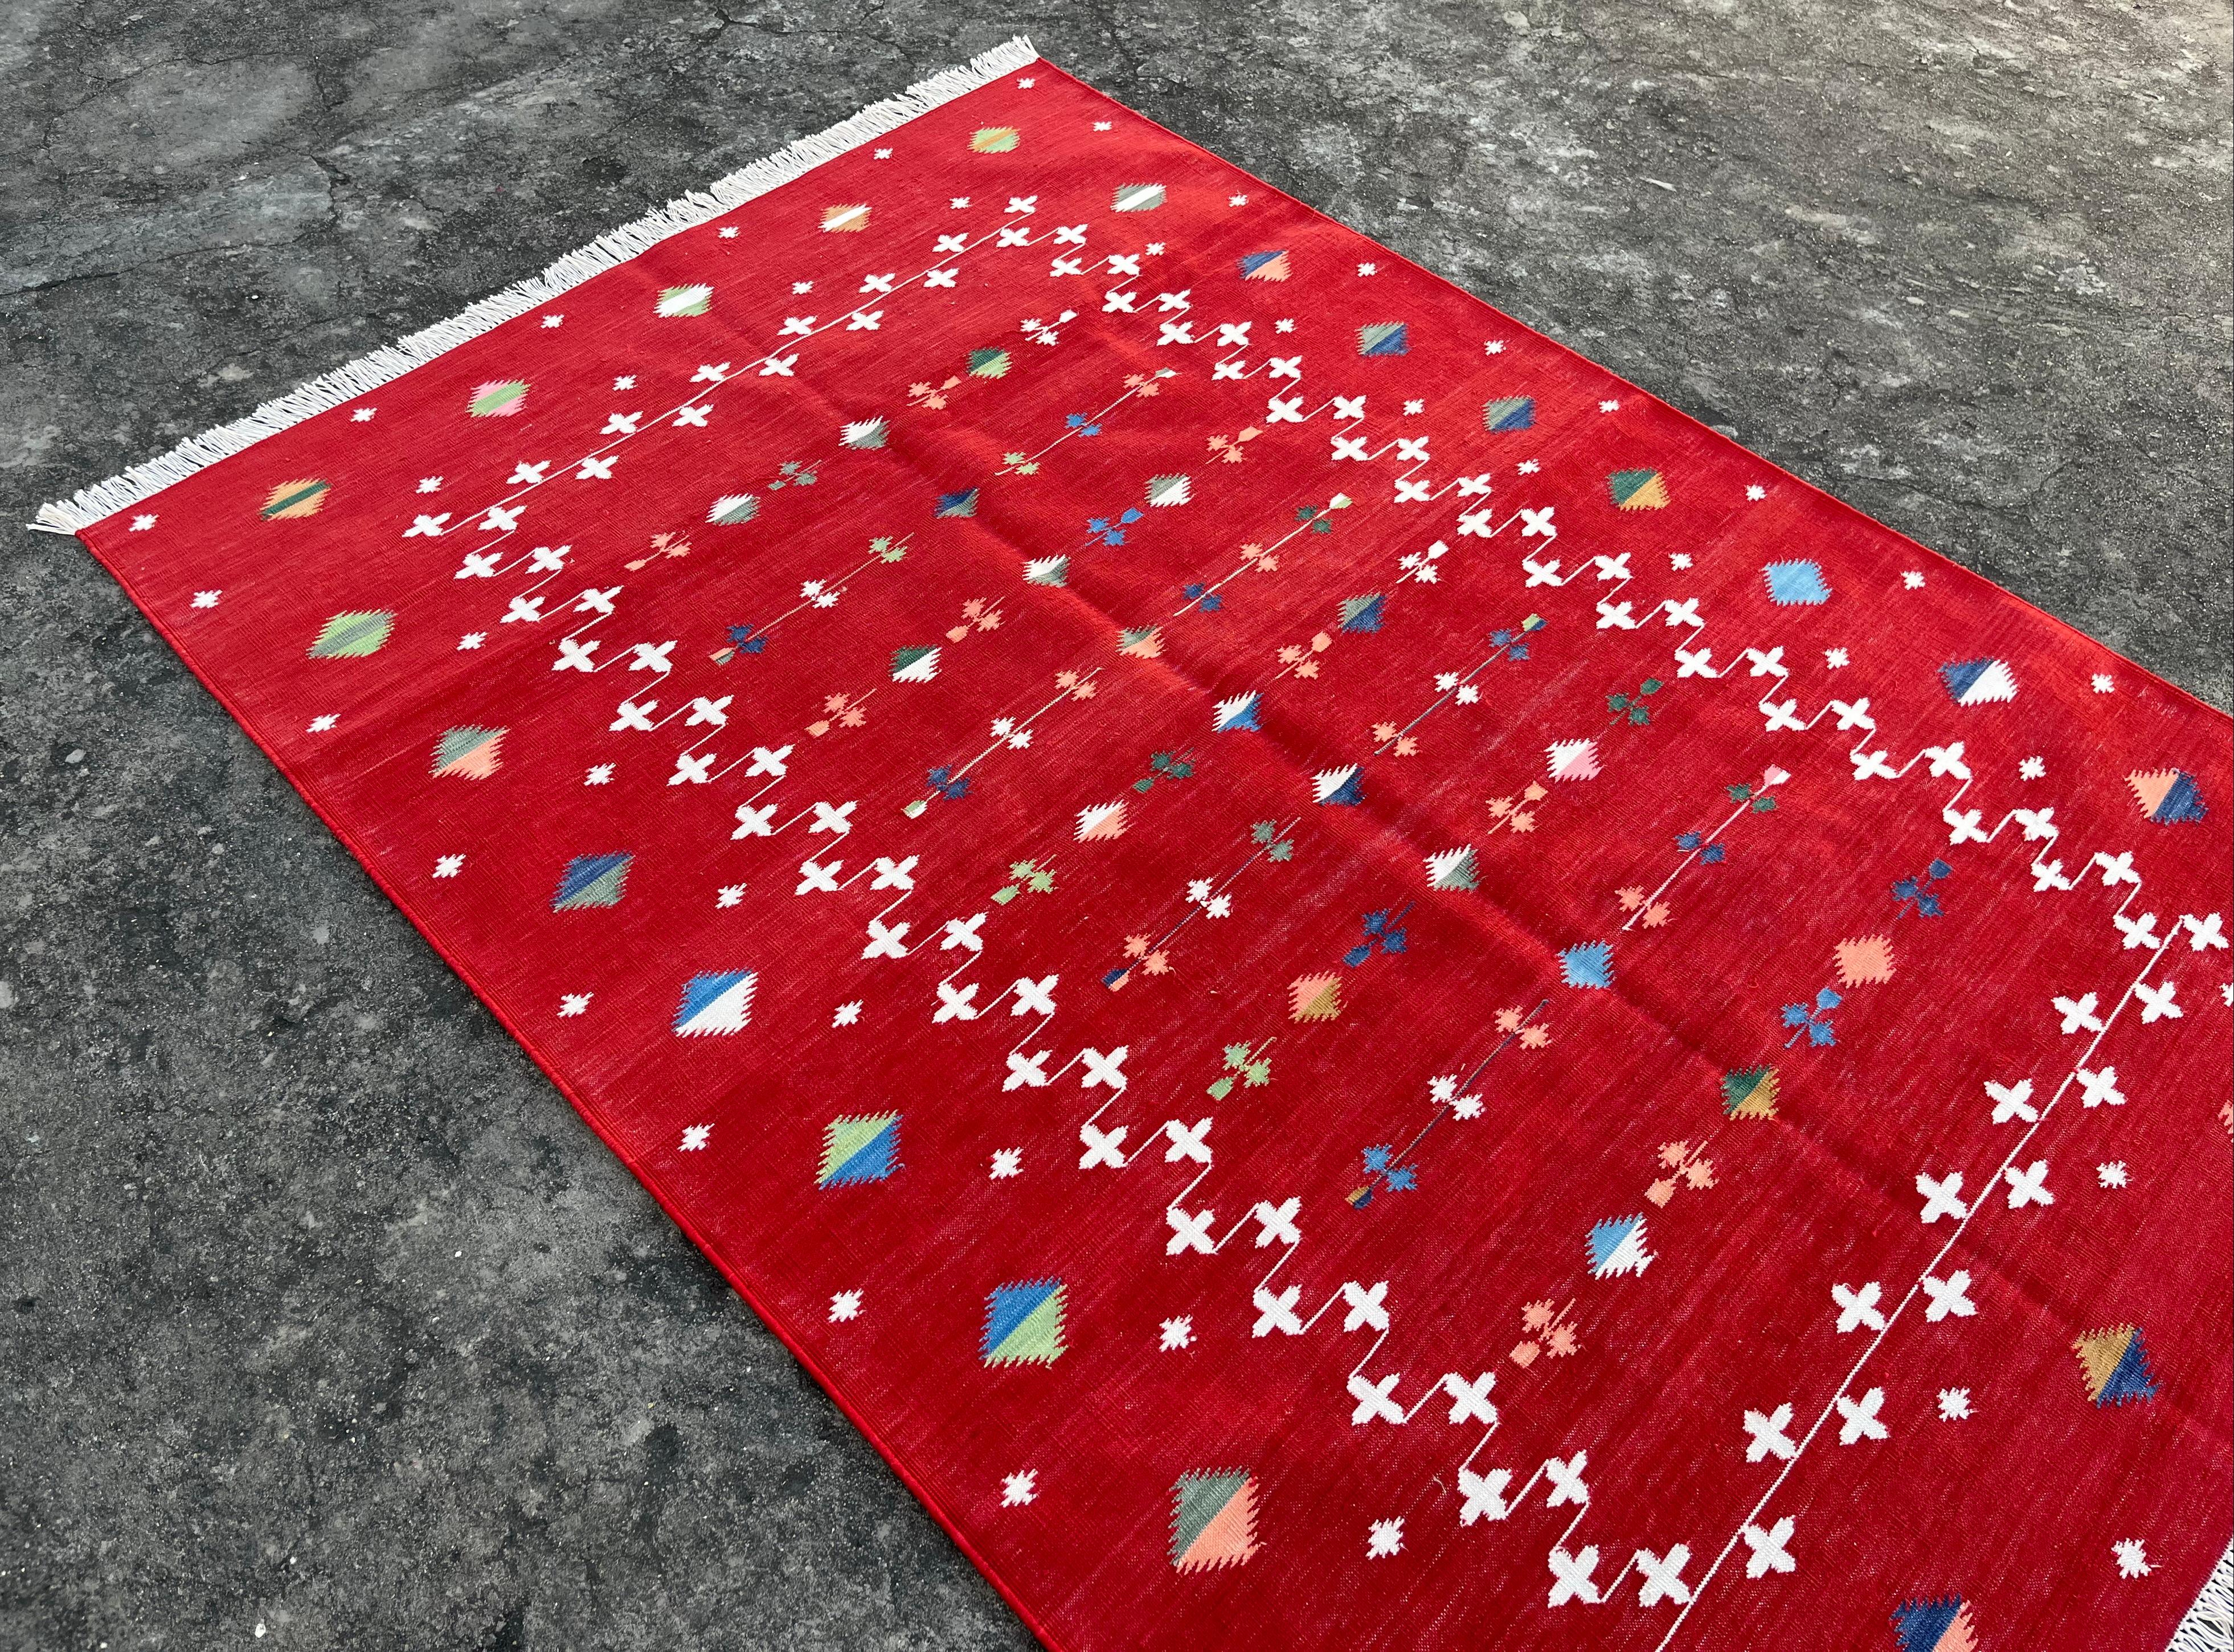 Hand-Woven Handmade Cotton Area Flat Weave Rug, 4x6 Red And White Shooting Star Dhurrie Rug For Sale